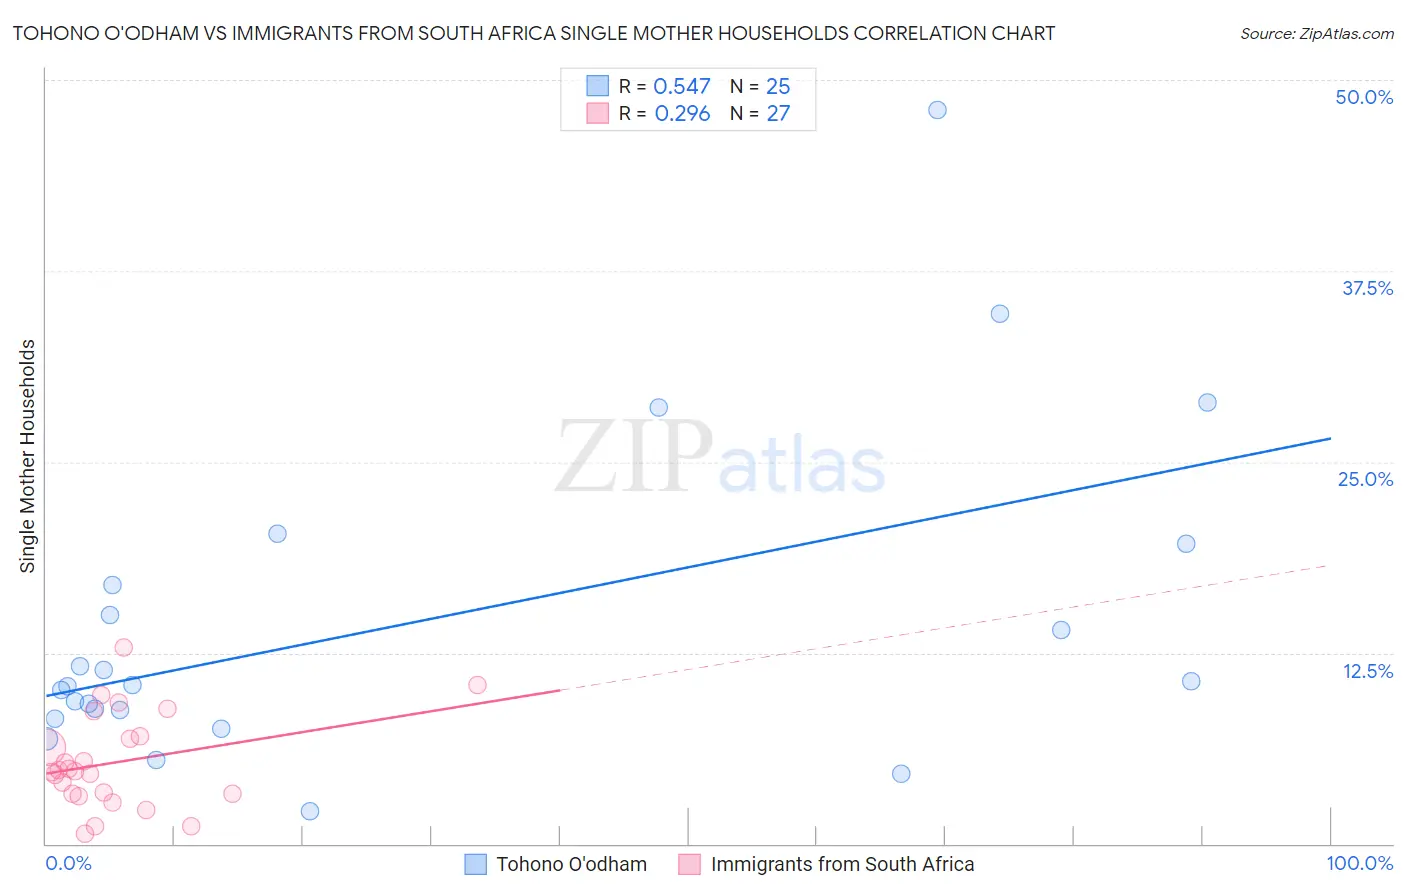 Tohono O'odham vs Immigrants from South Africa Single Mother Households